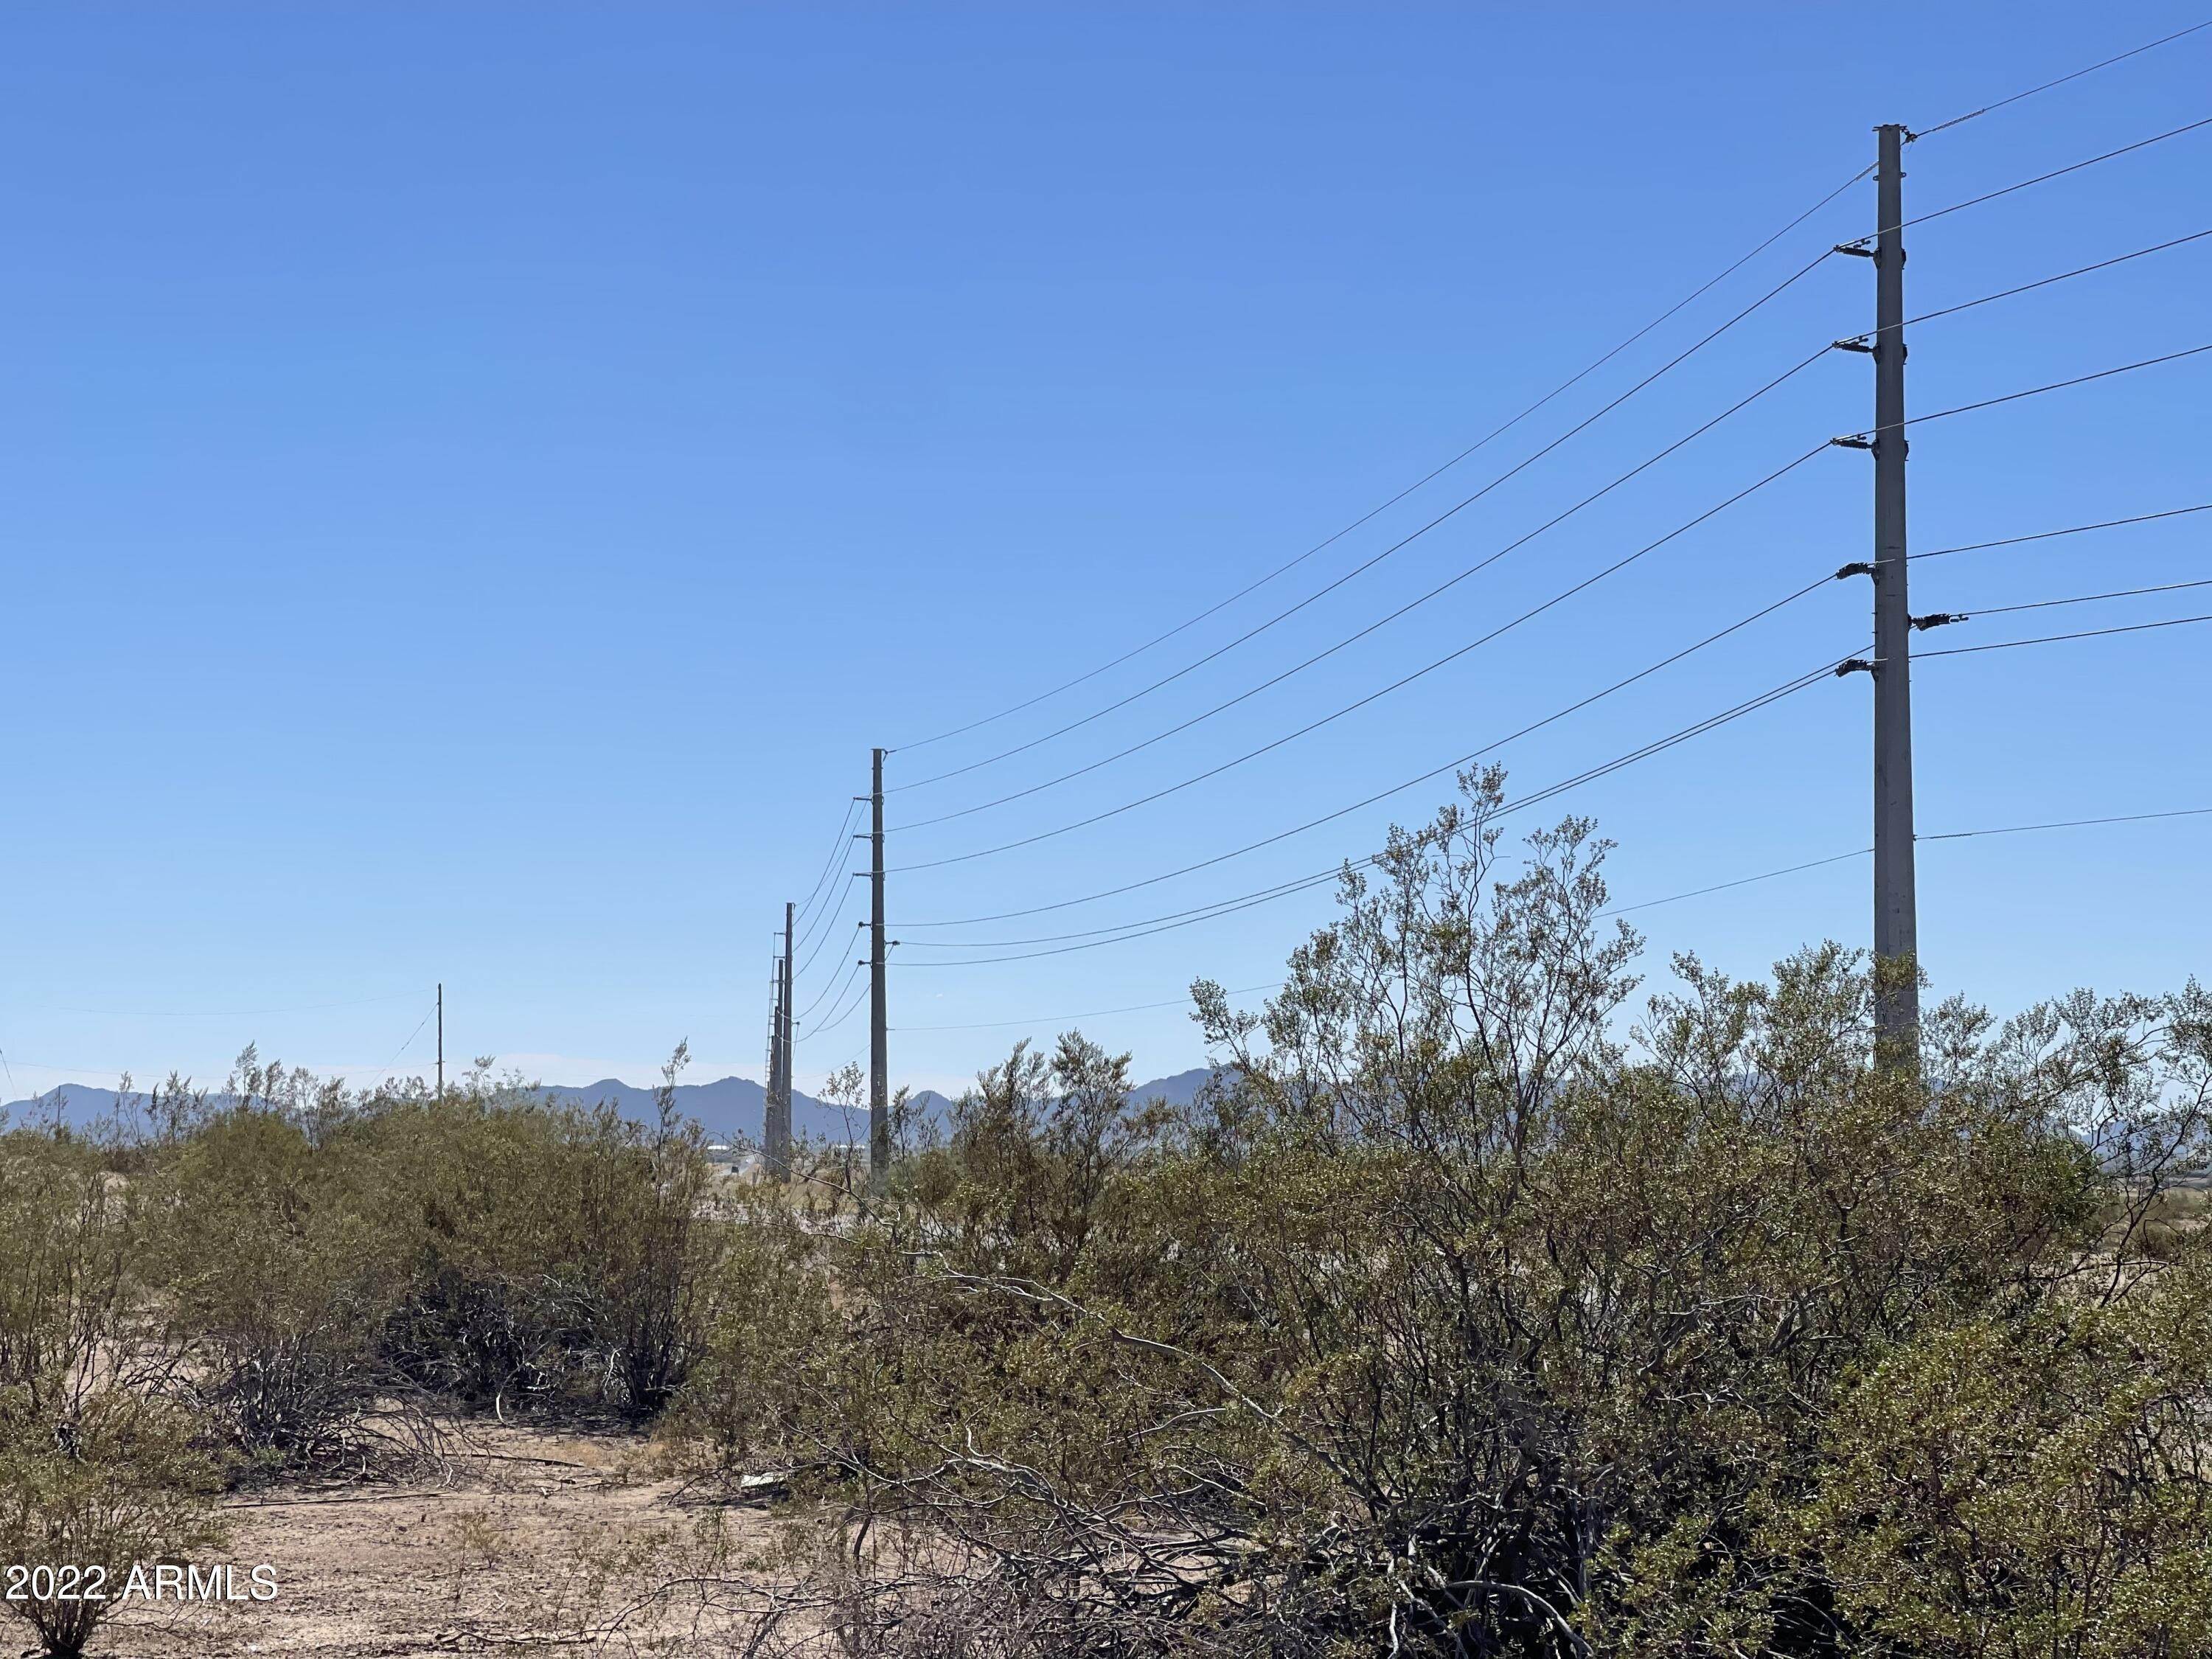 6. Land for Sale at Goodyear, AZ 85338